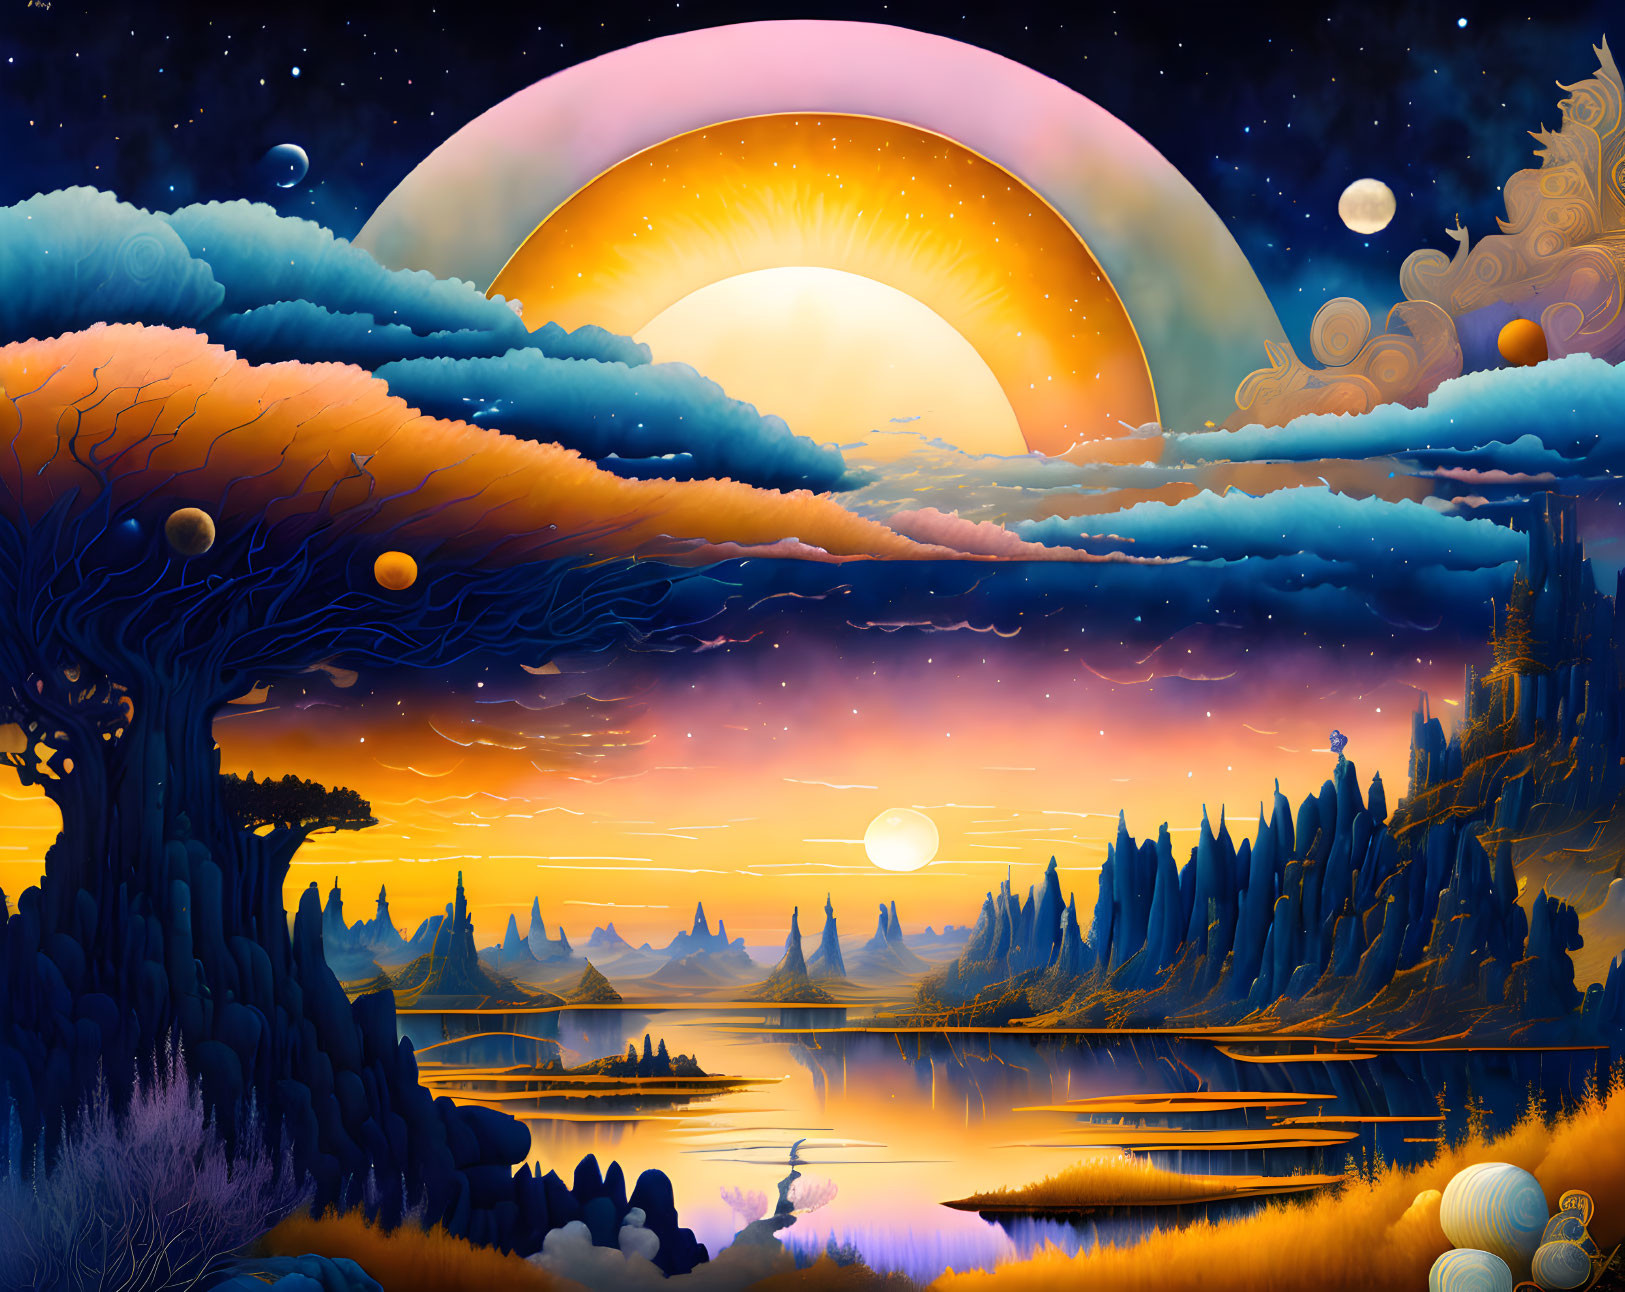 Colorful Clouds and Floating Islands in Fantastical Landscape